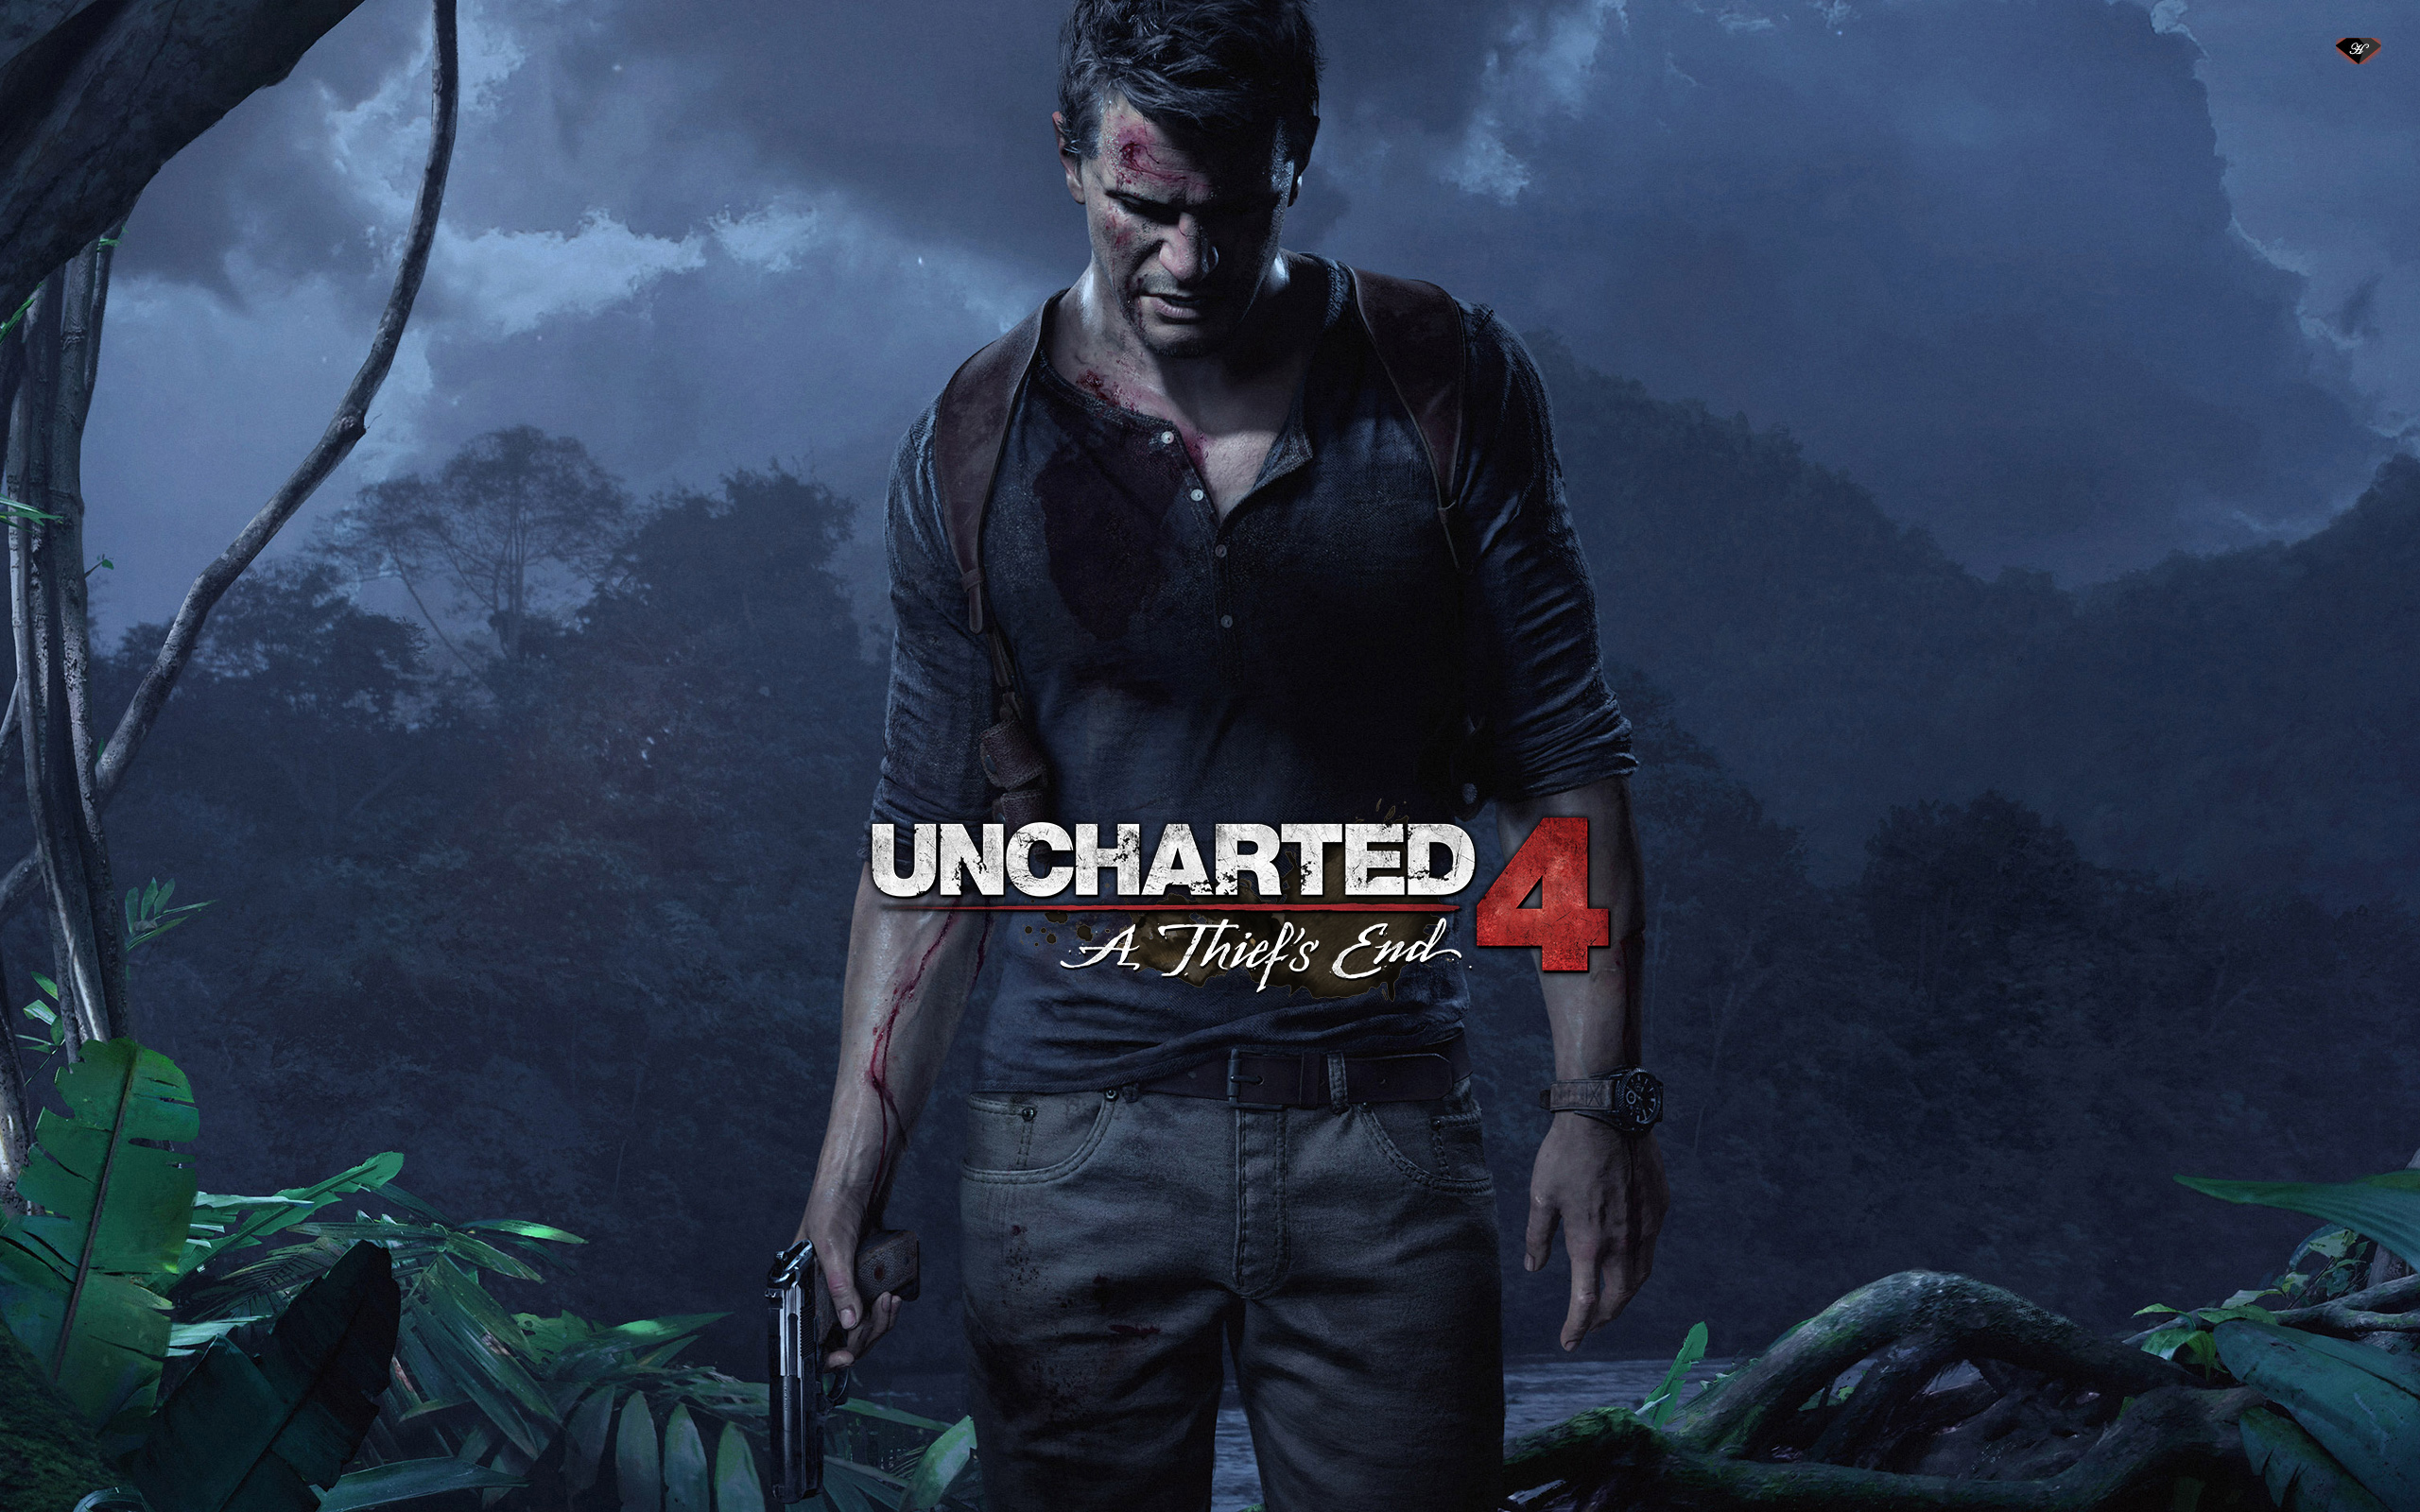 uncharted 4 pc download crack skidrow